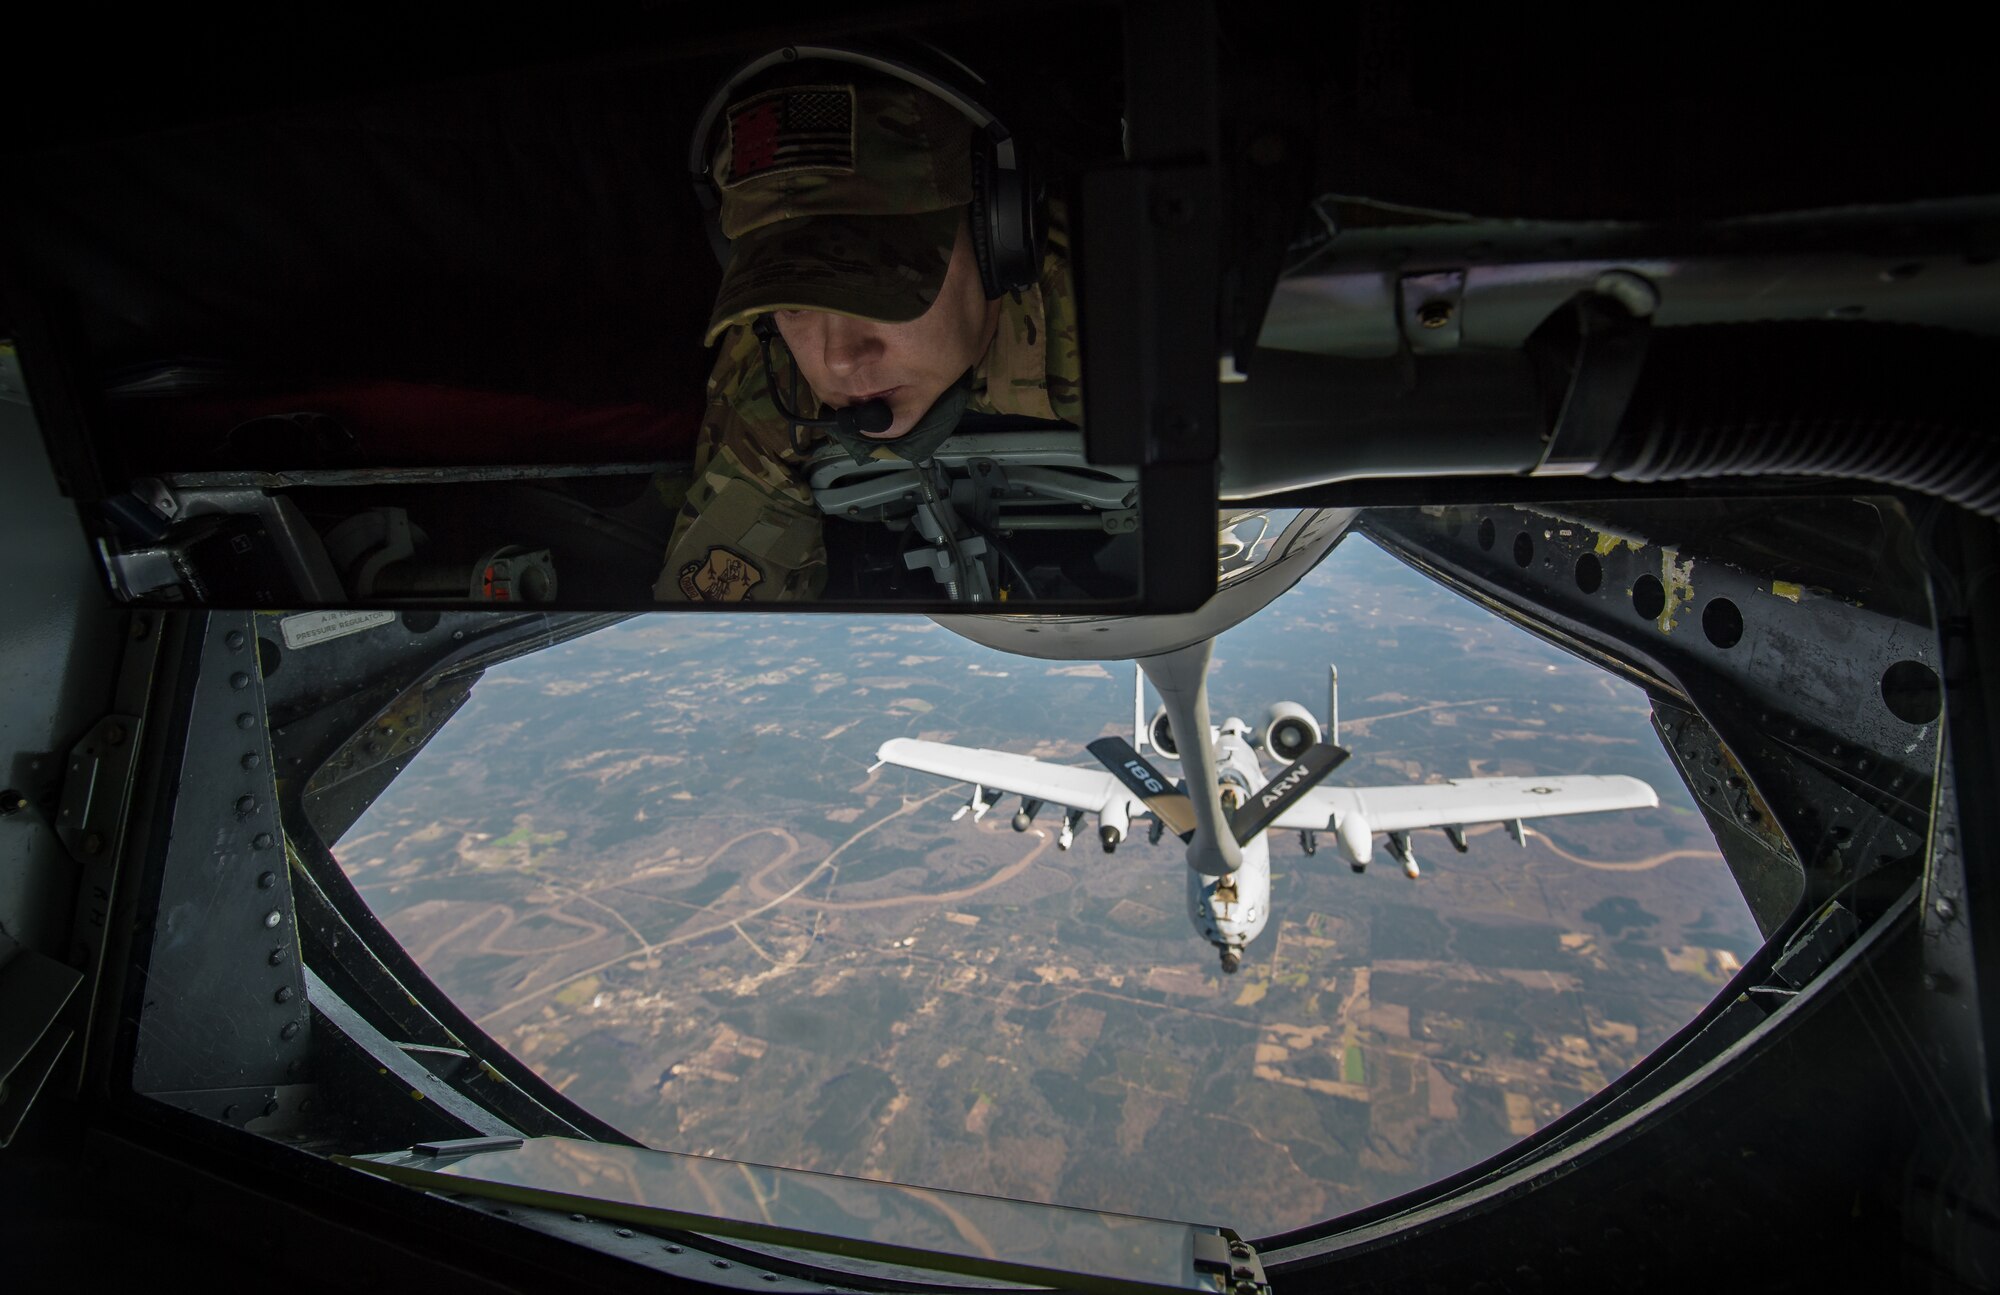 A U.S. Air Force KC-135 Stratotanker boom operator, assigned to the Mississippi Air National Guard 186th Air Refueling Wing, refuels an A-10 Thunderbolt II as part of Southern Strike 2020 over the Gulfport Combat Readiness Training Center, Miss., Feb. 7, 2020.